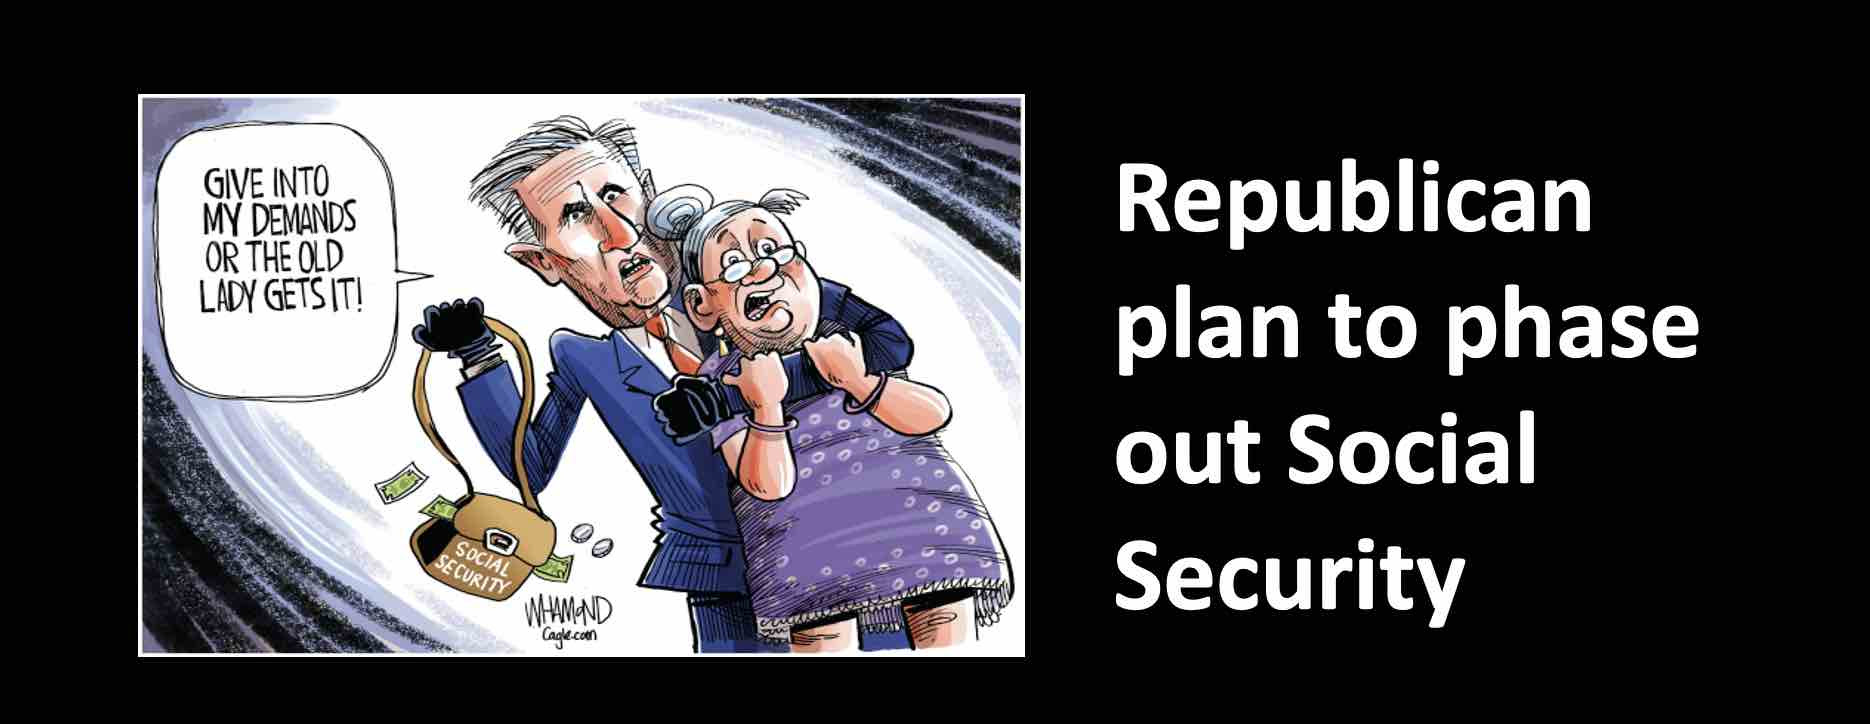 Republican plan to phase out Social Security